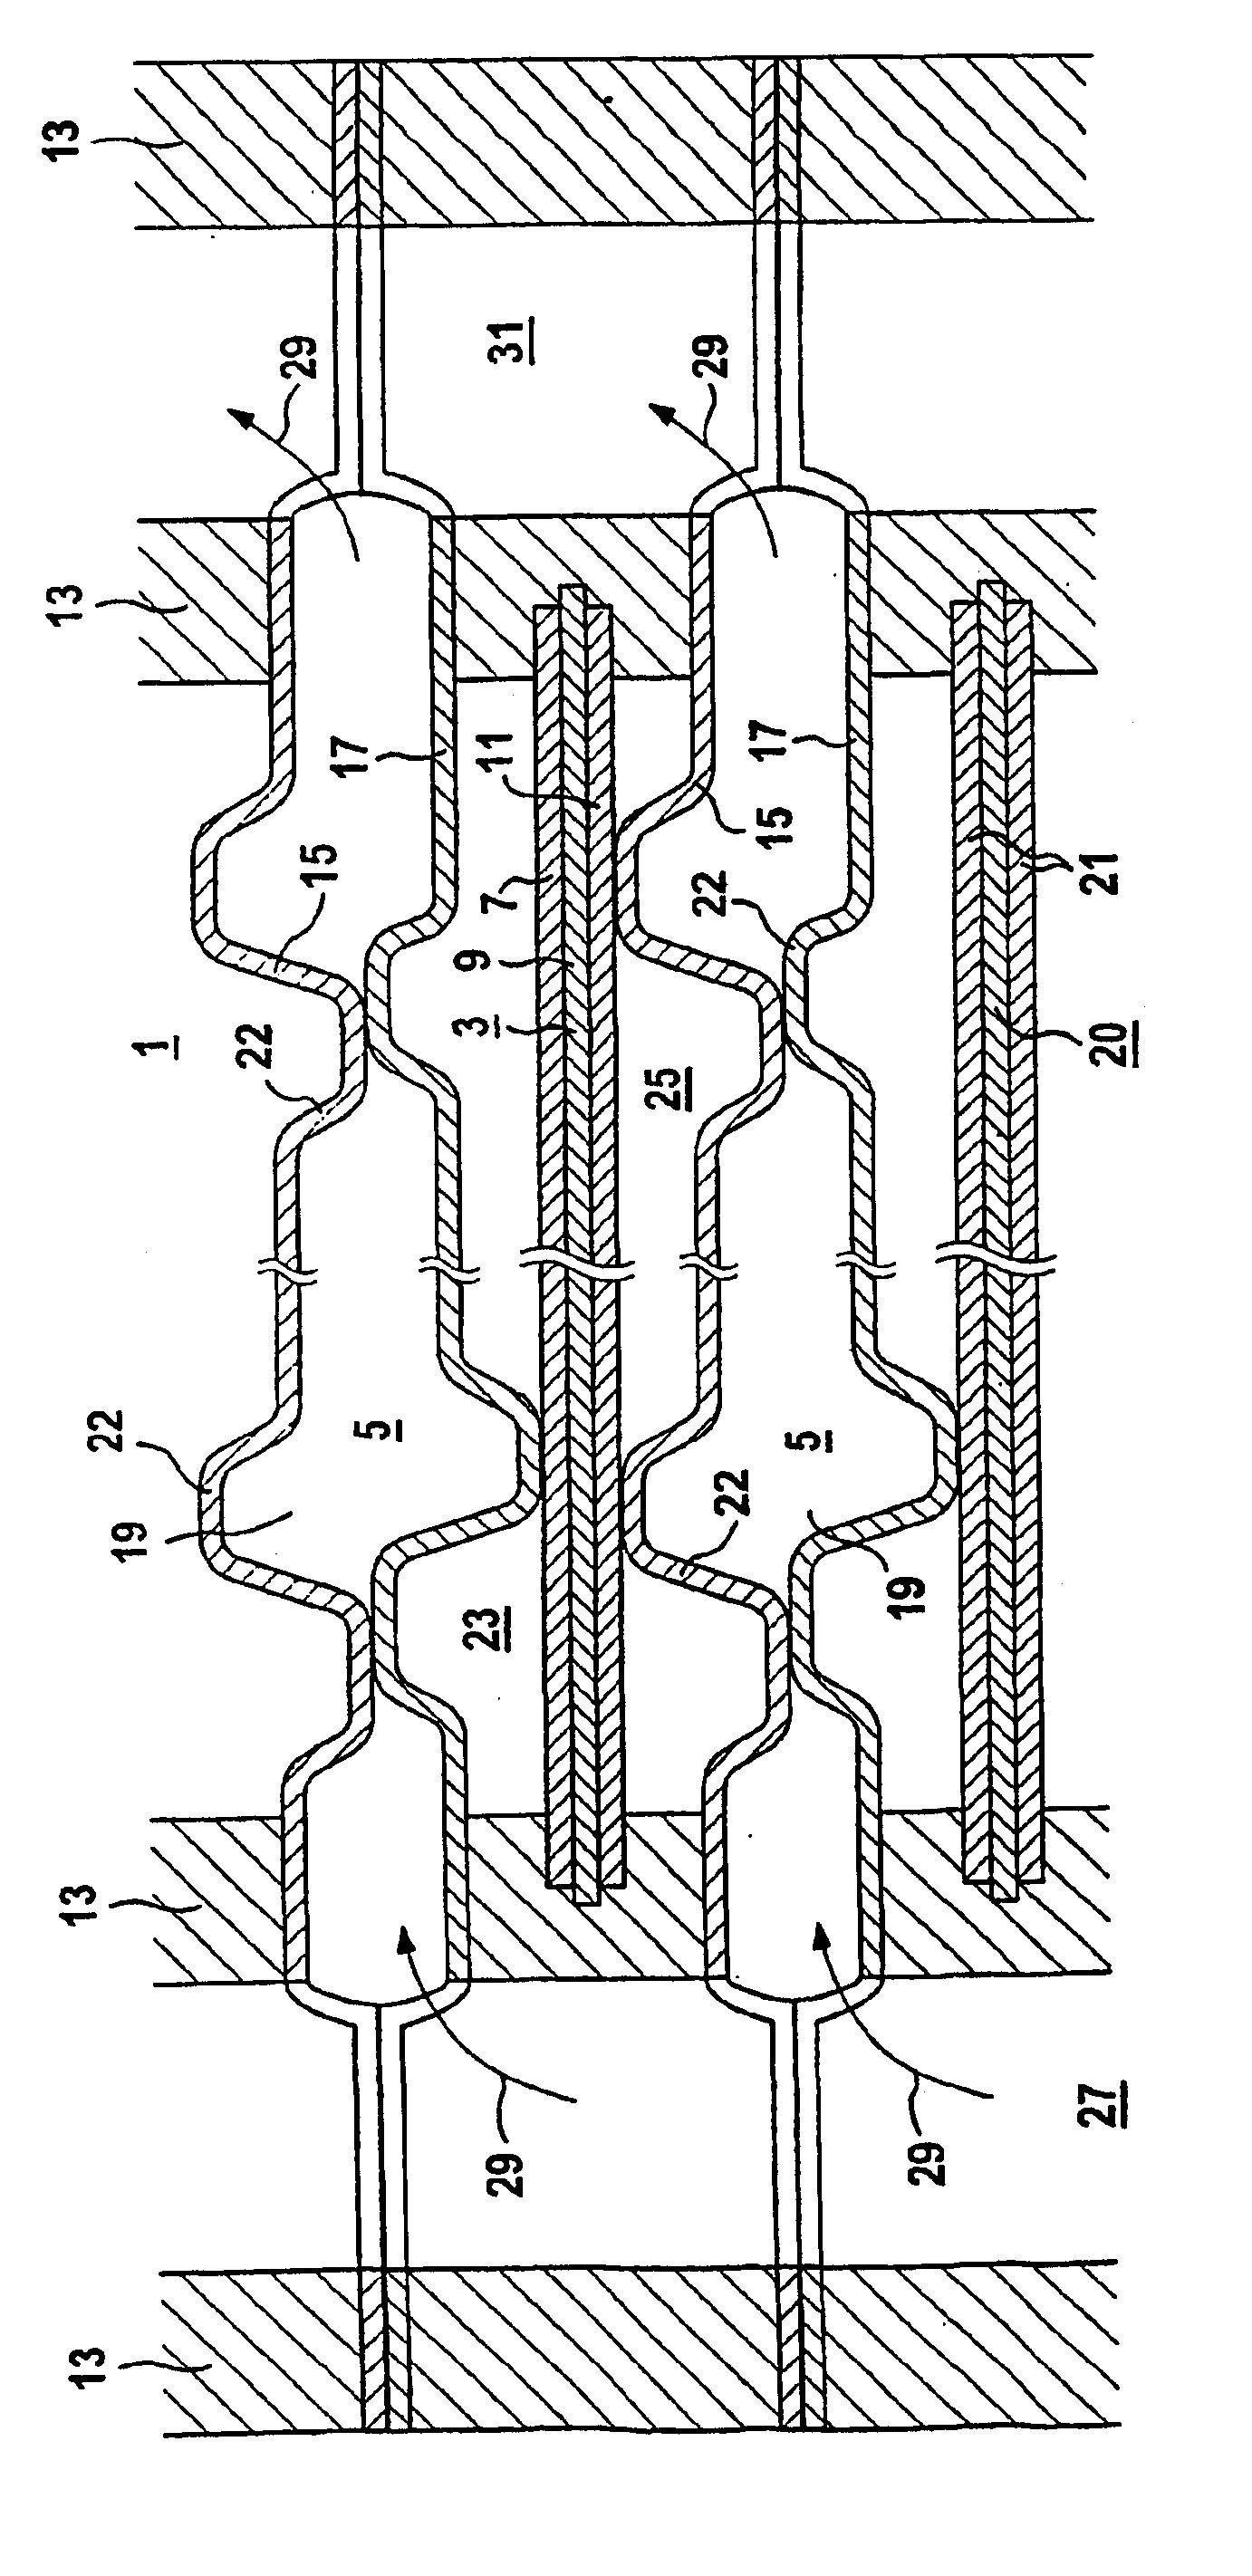 Low-temperature fuel cell